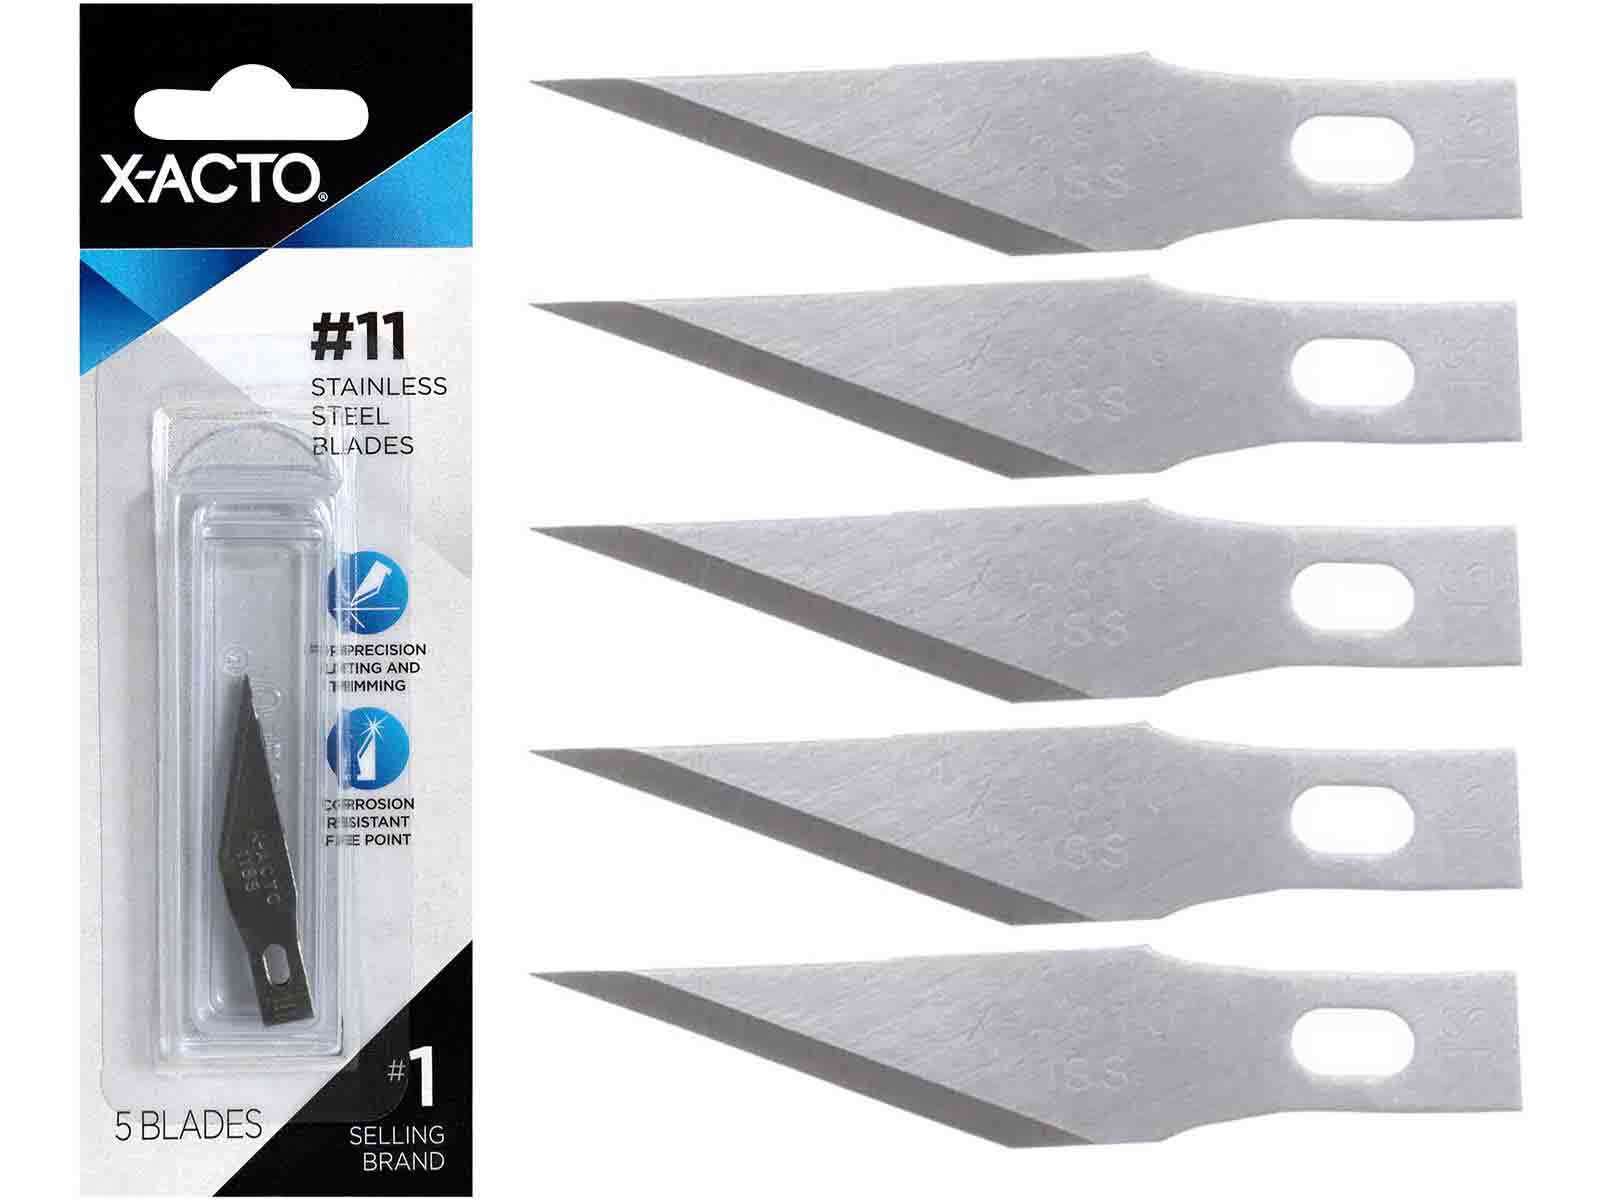 5pc X-ACTO X221 No 11SS Stainless Steel Knife Blades | eBay